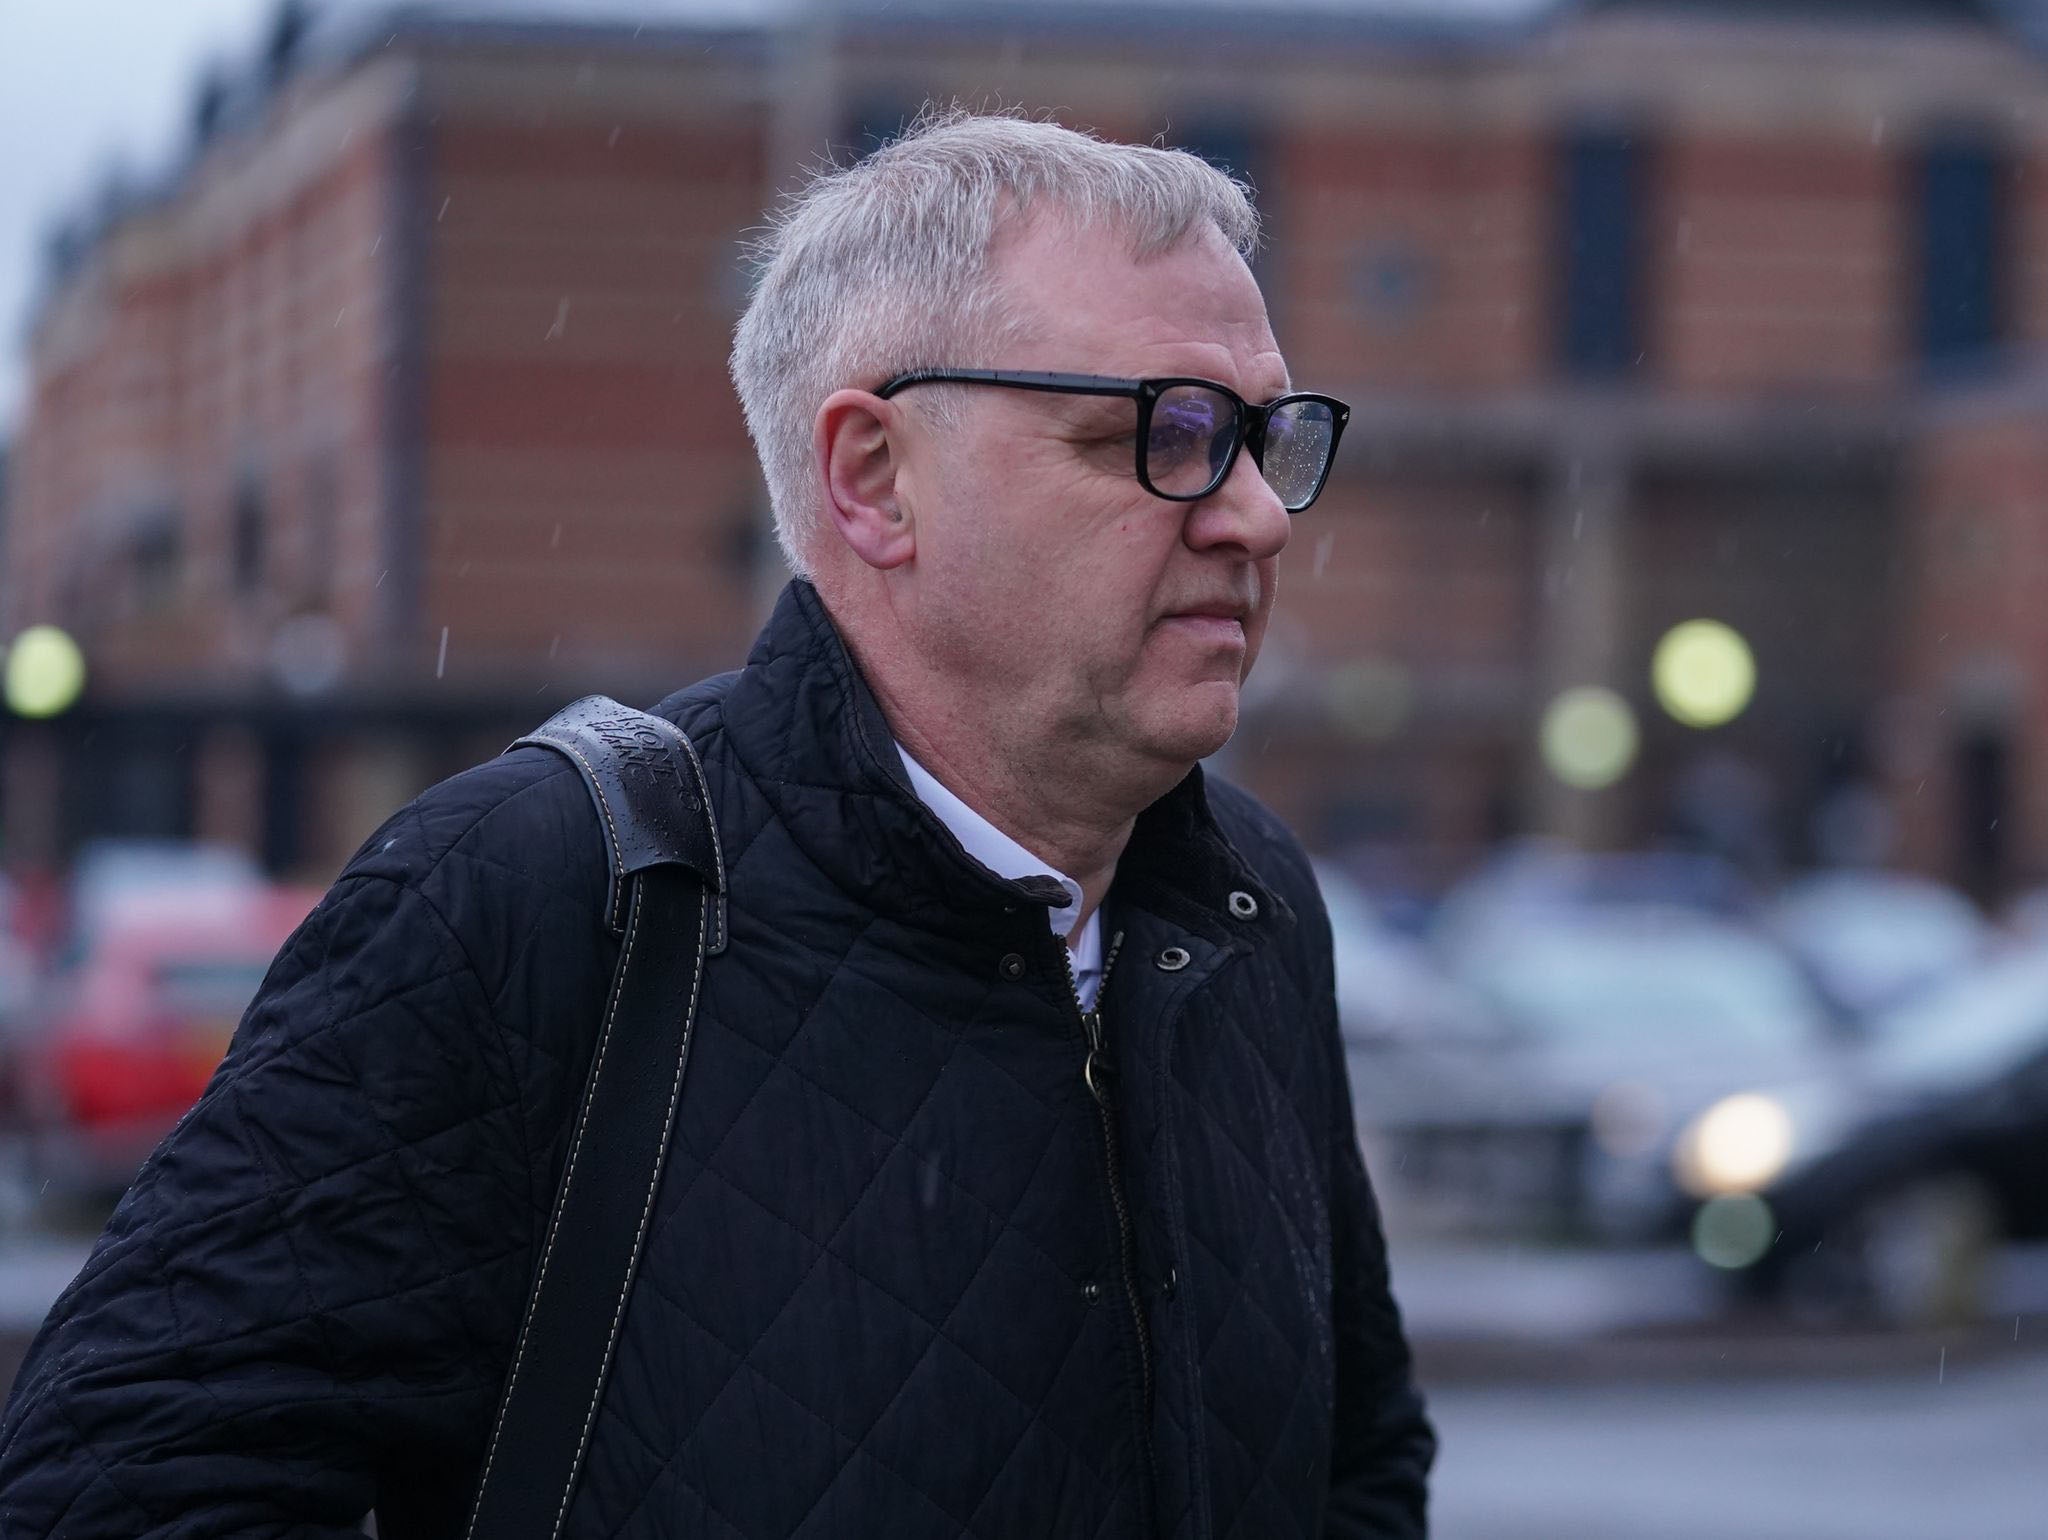 Mark Page was convicted of four out of five counts of commissioning child sex offences.